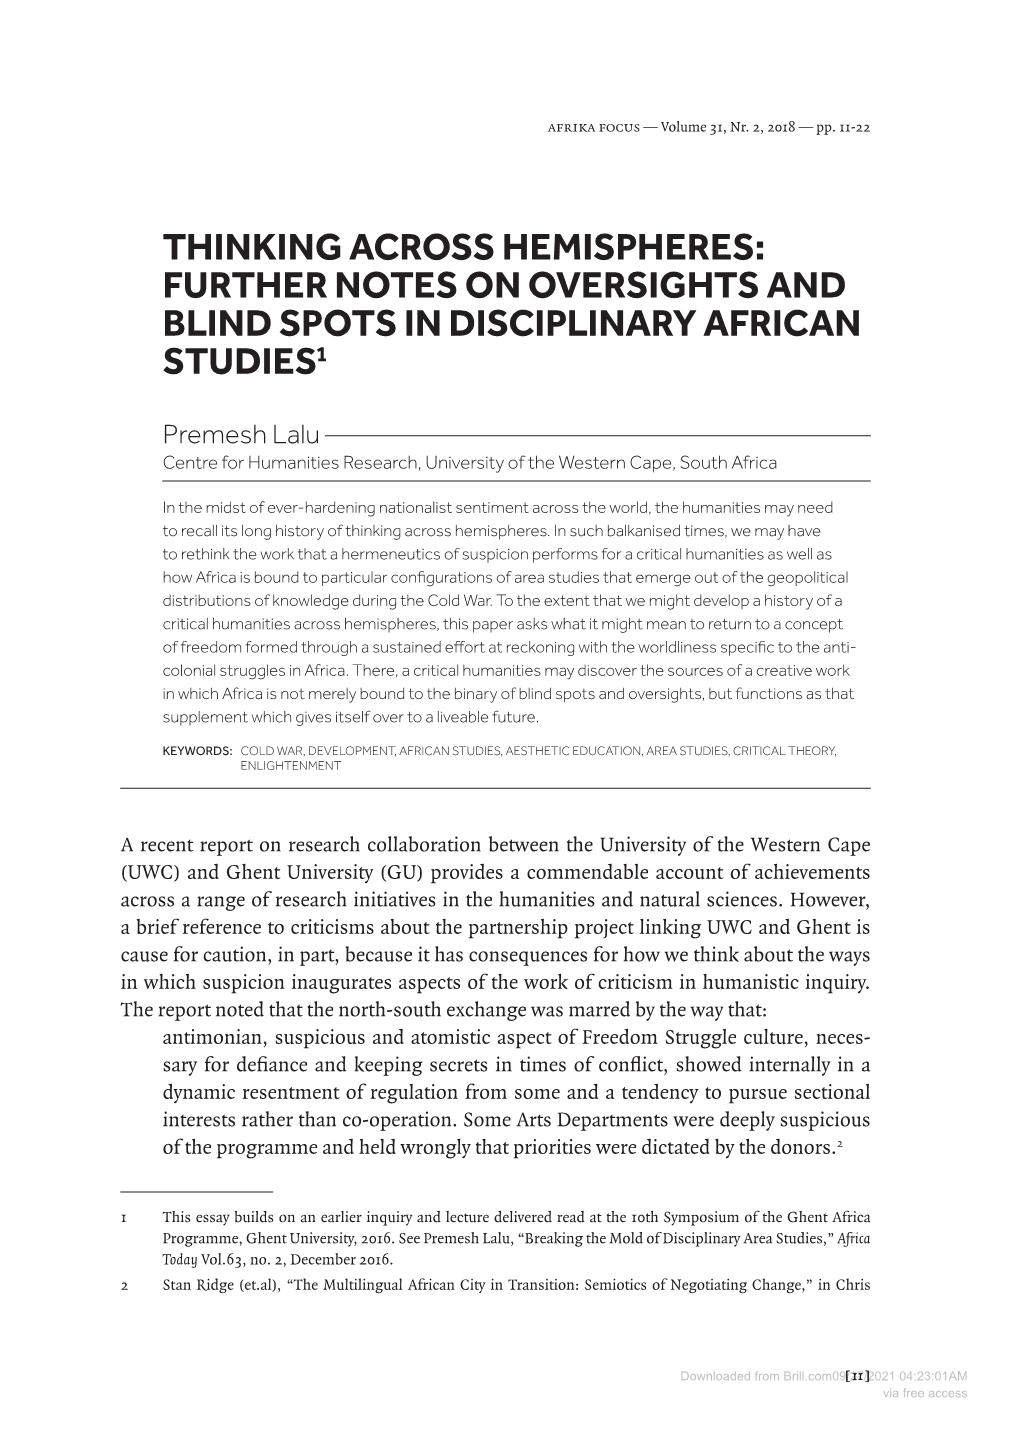 Thinking Across Hemispheres: Further Notes on Oversights and Blind Spots in Disciplinary African Studies1